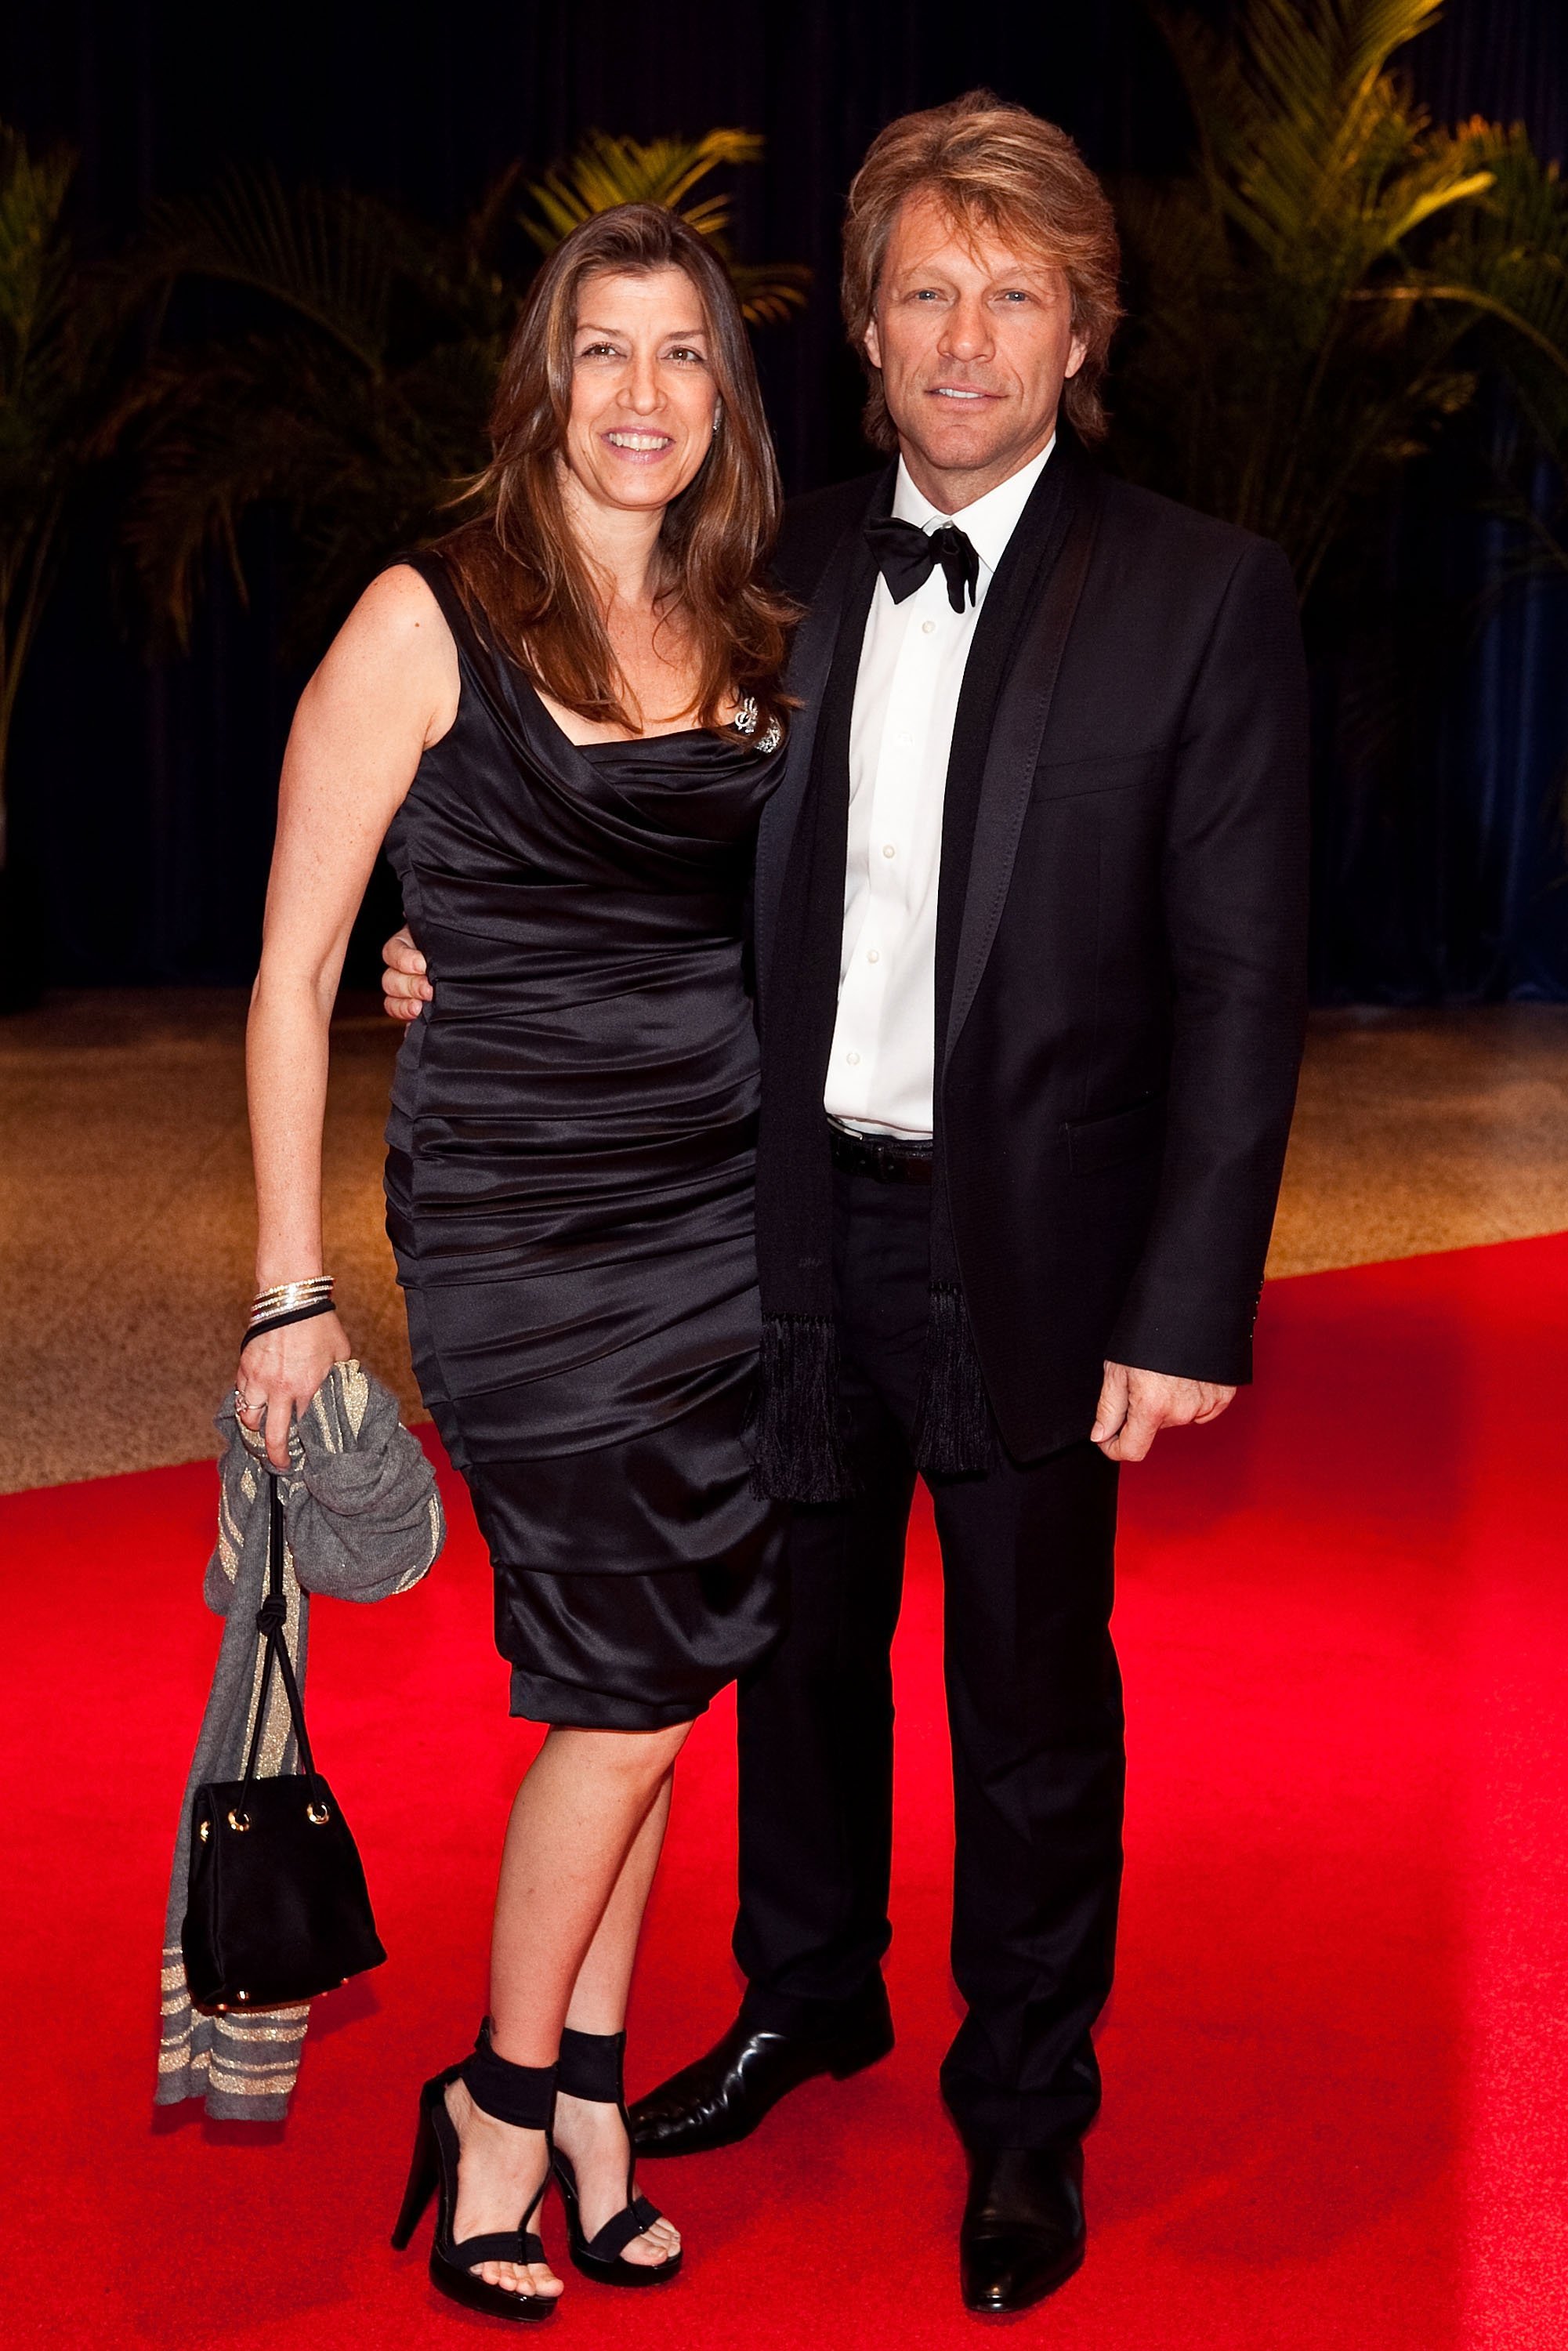 Jon Bon Jovi and Dorothea Hurley are photographed as they arrive at the 2010 White House Correspondents' Association Dinner at the Washington Hilton on May 1, 2010, in Washington, DC | Source: Getty Images